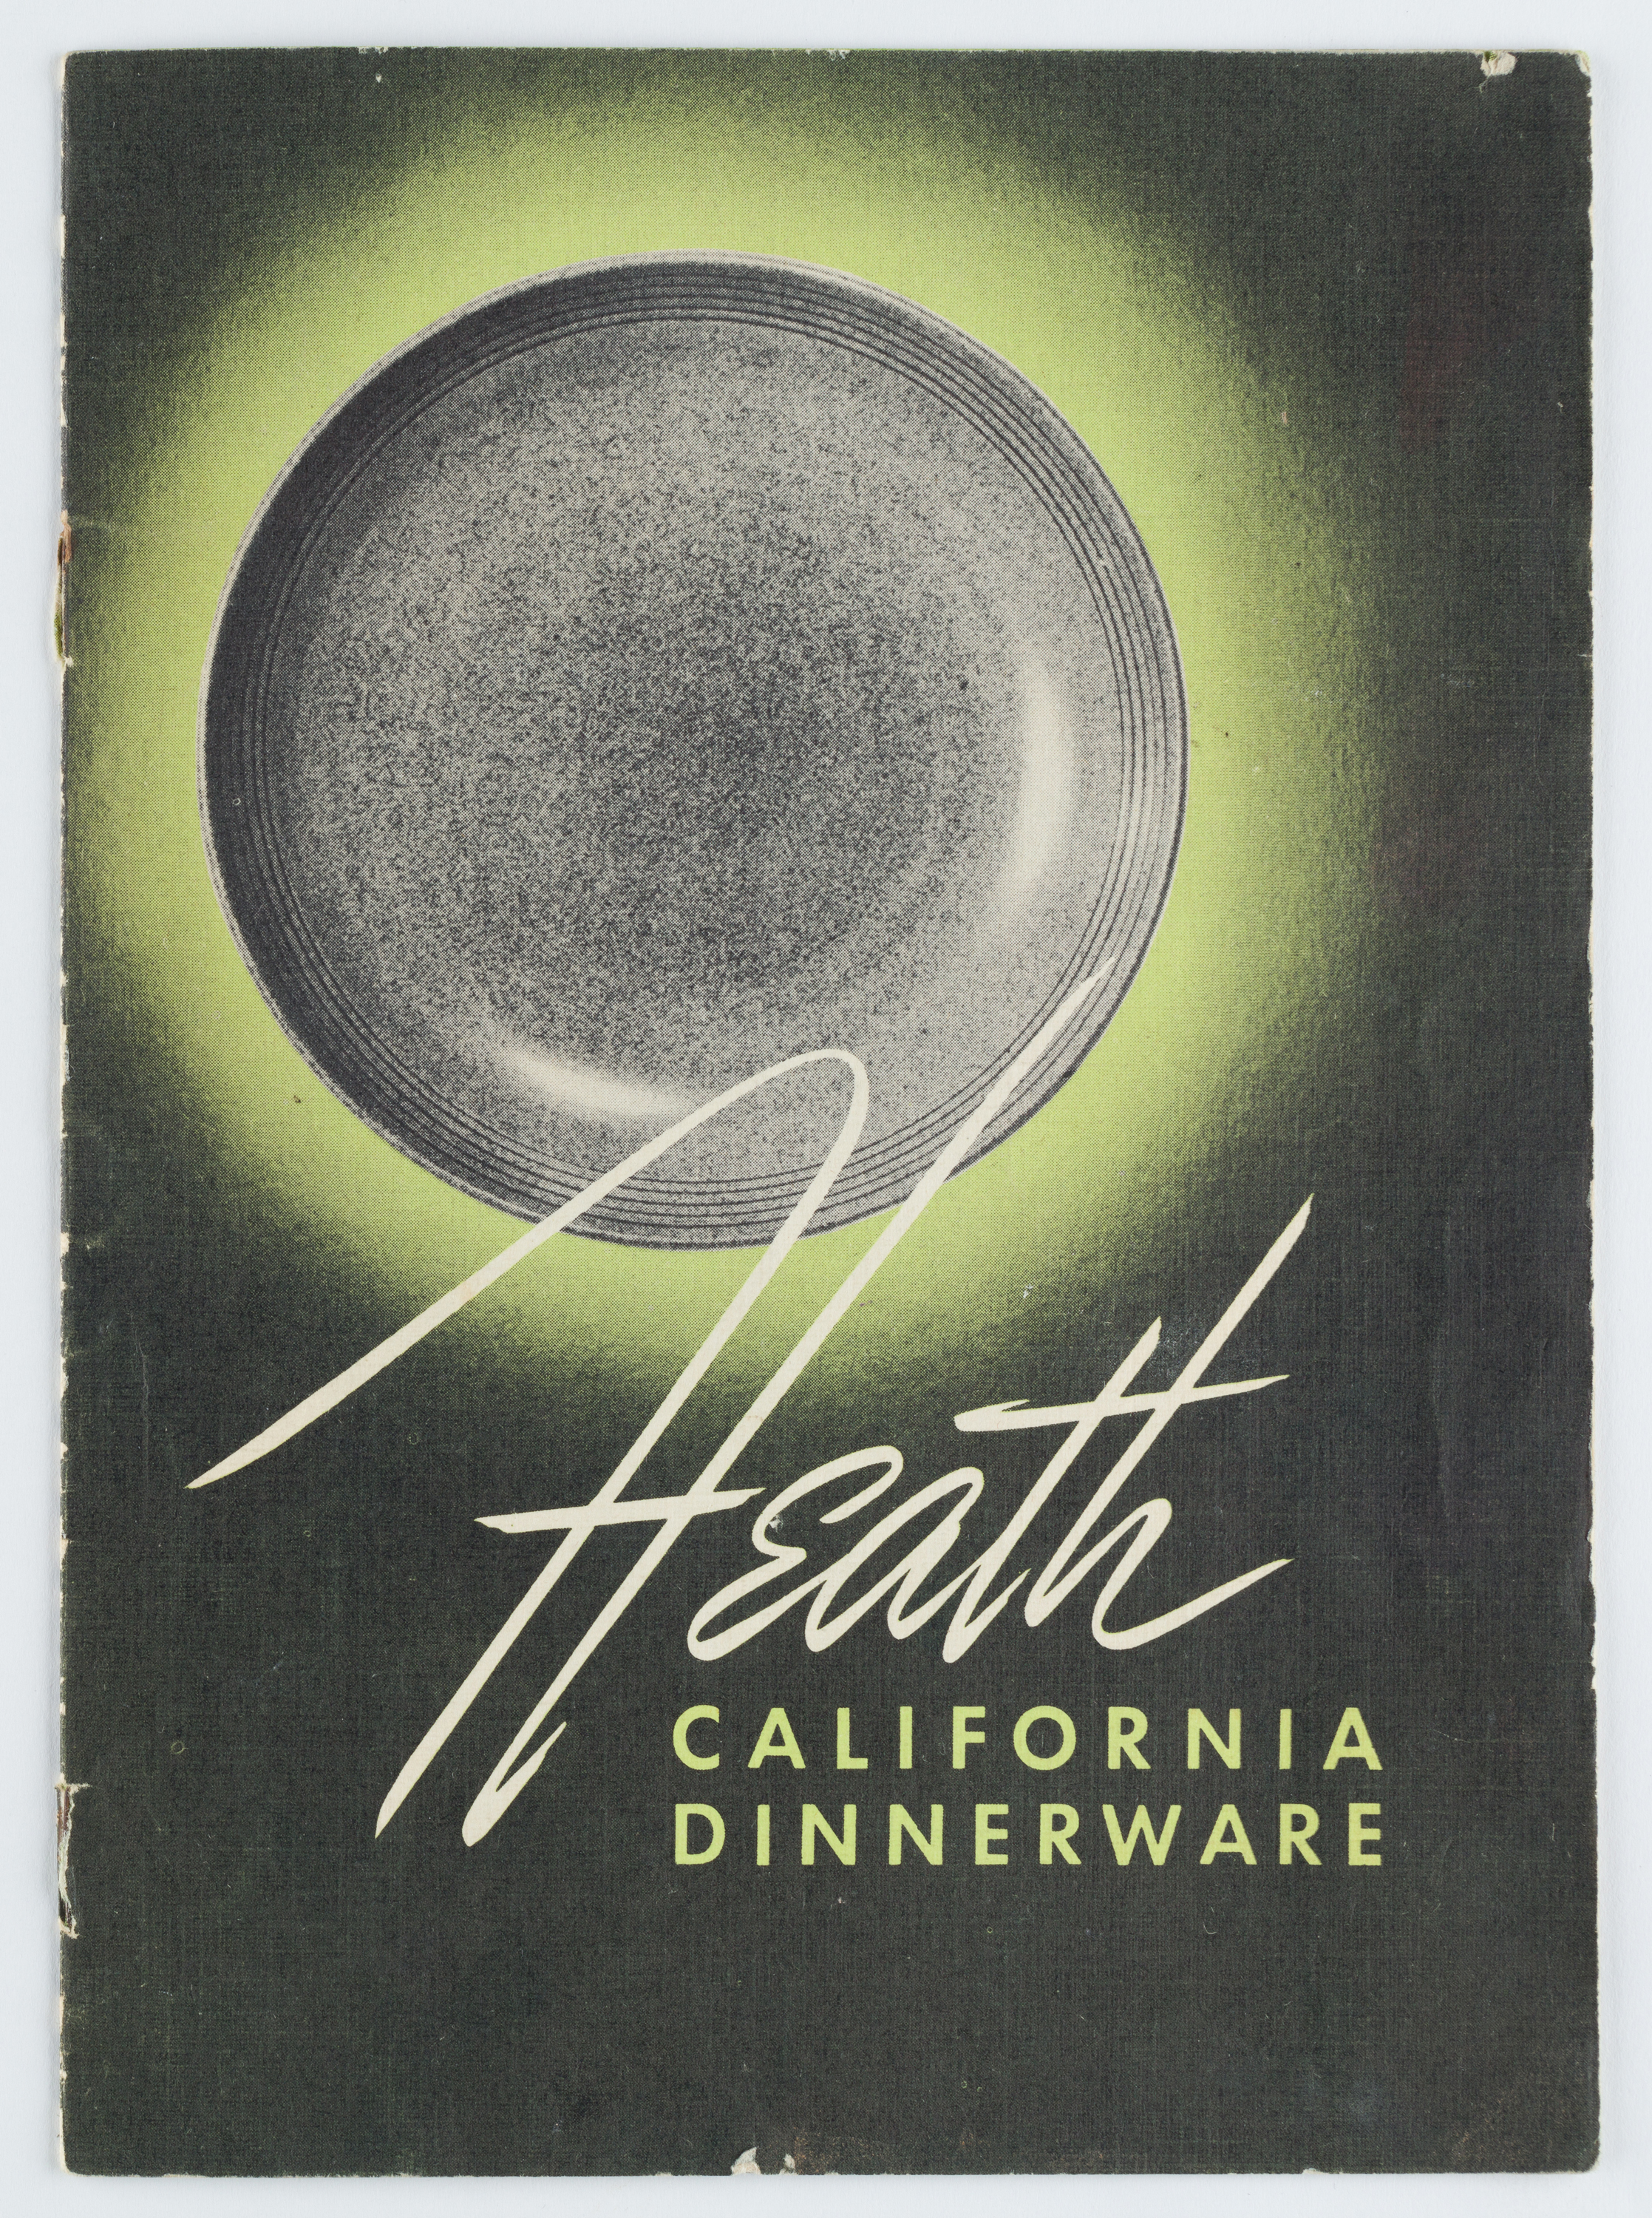 Cover of a sales brochure with black backgorund, black and white image of a ceramic plate with a green halo around and white and green letters.